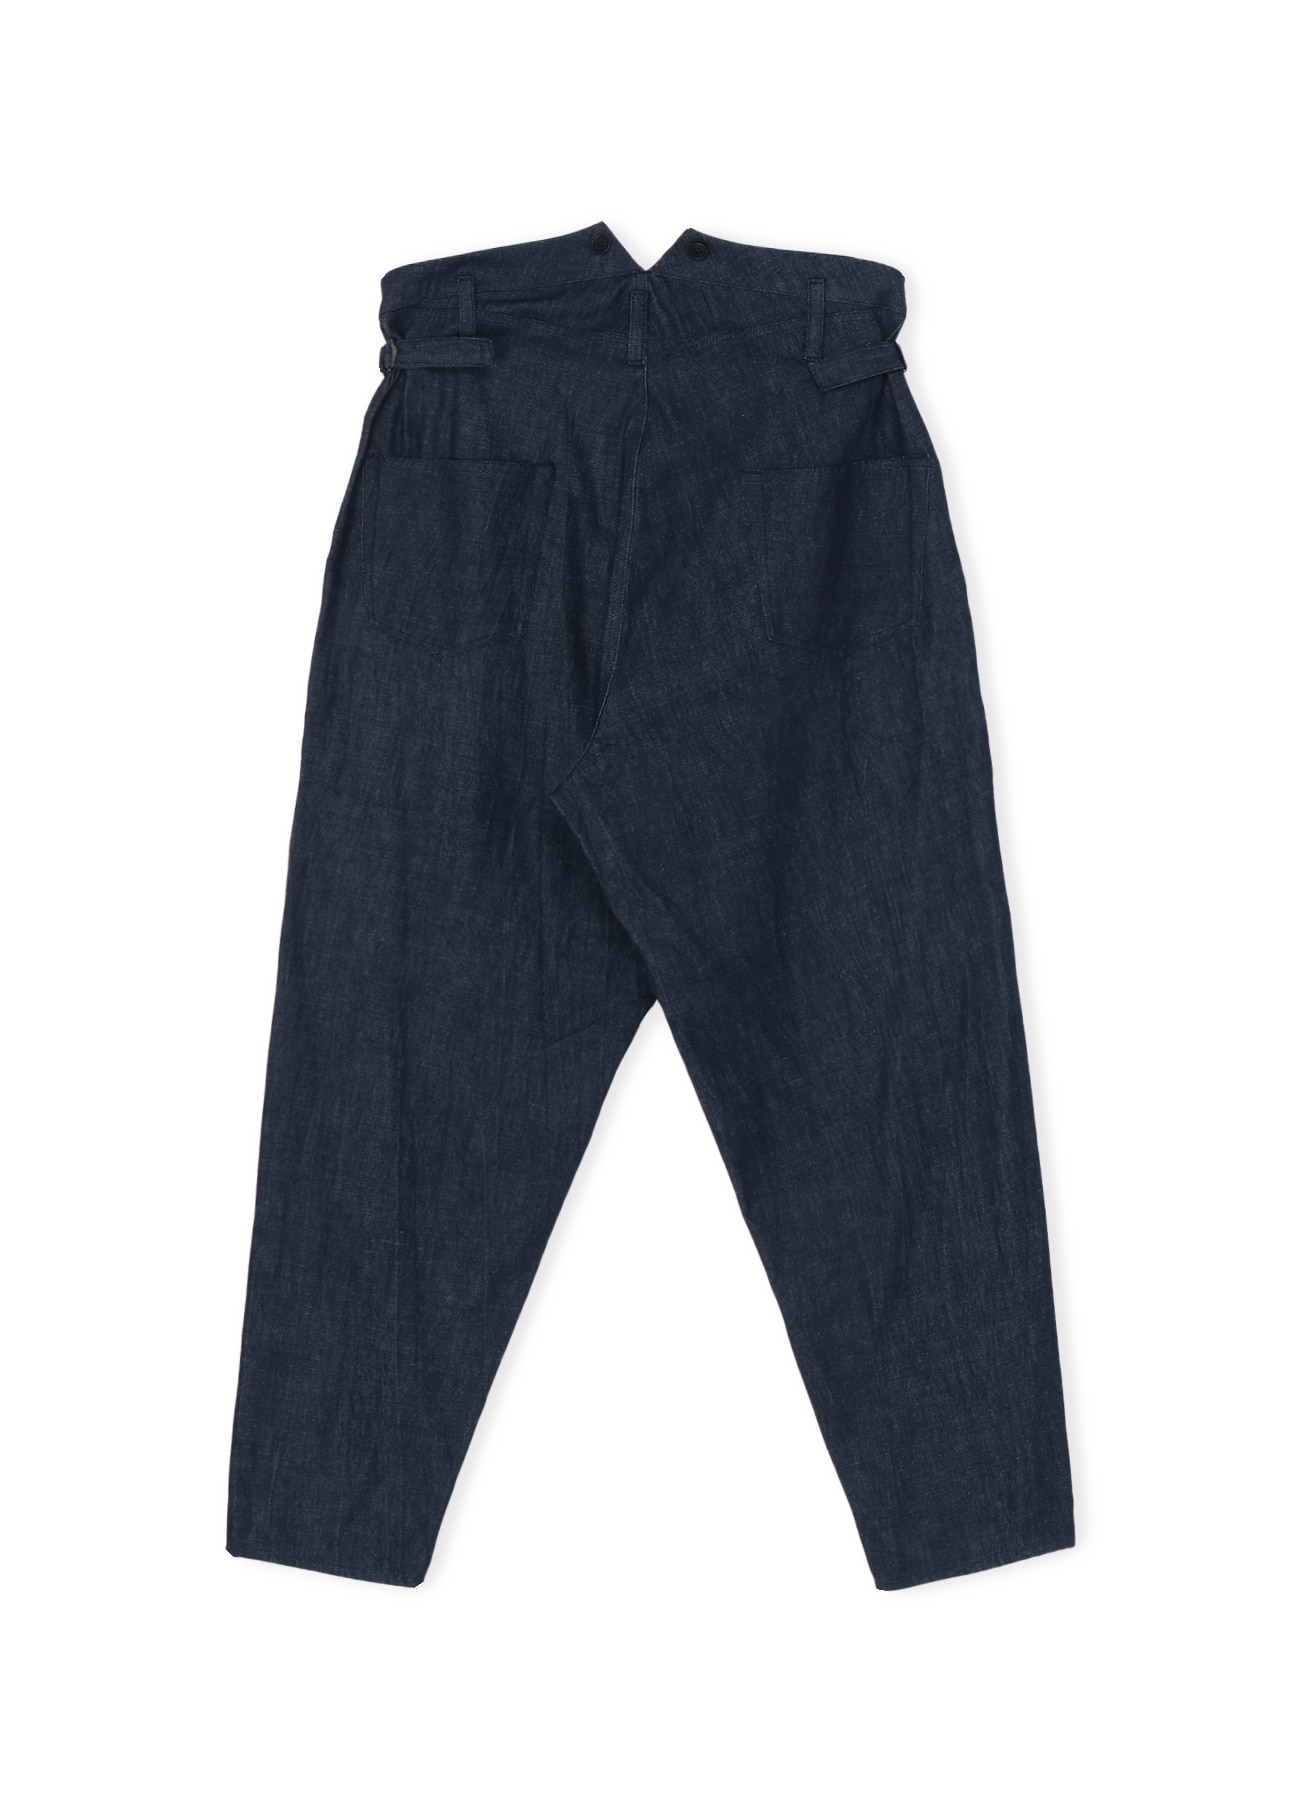 DENIM PANTS WITH SUSPENDER BUTTONS AND ADJUSTABLE SIDE TABS(S INDIGO):  Soldes｜WILDSIDE YOHJI YAMAMOTO【Official】